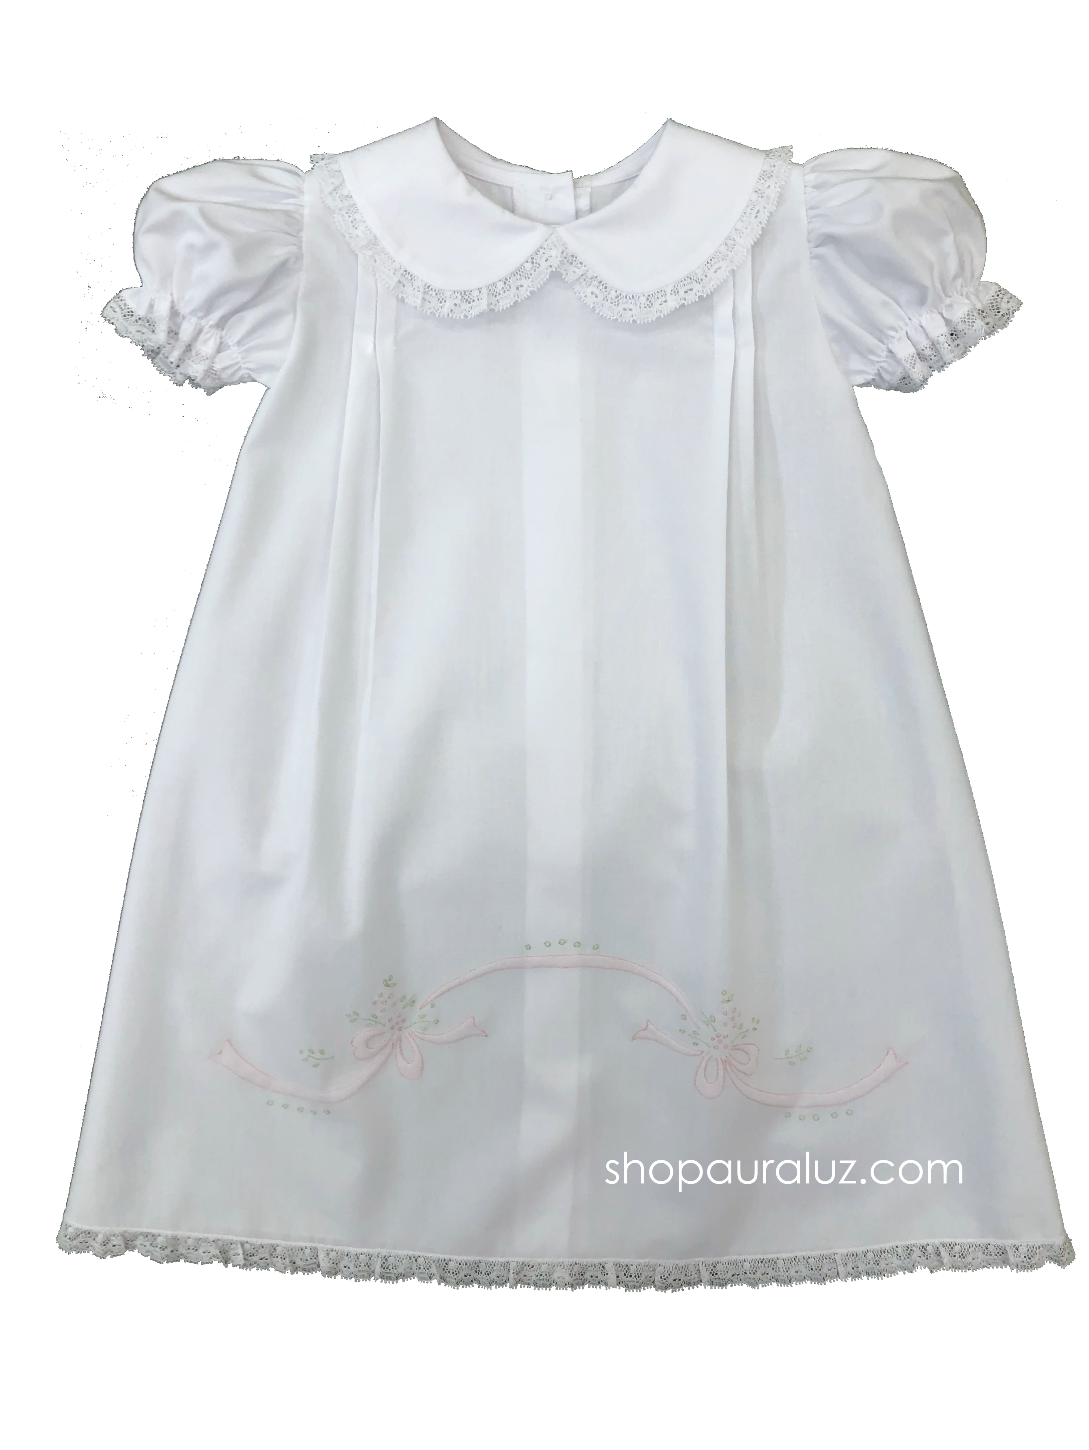 Auraluz Girl Day Gown..White with white lace and embroidered ribbon bows